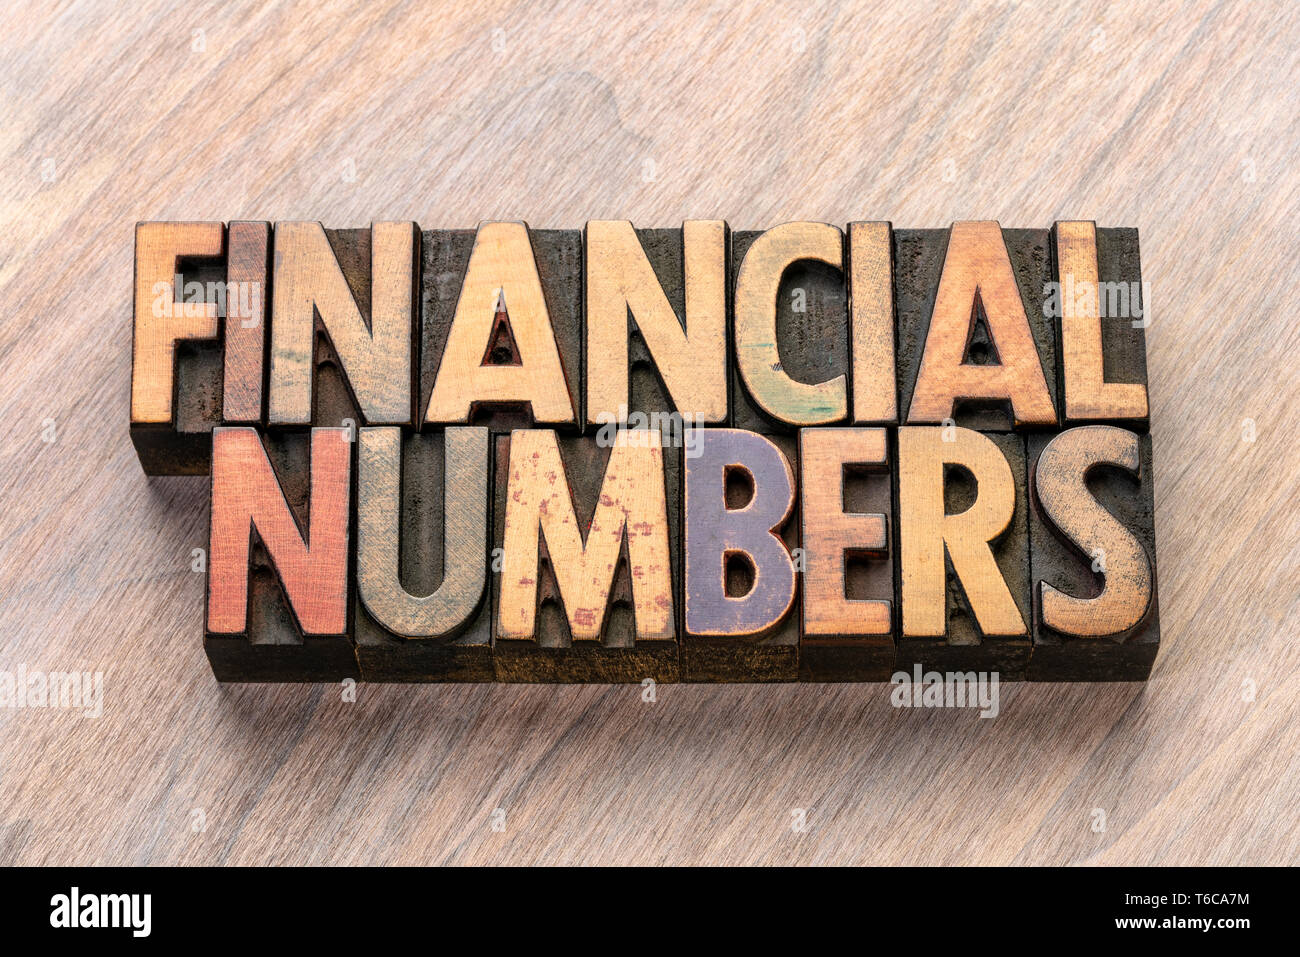 financial numbers word abstract in vintage letterpress wood type Stock Photo